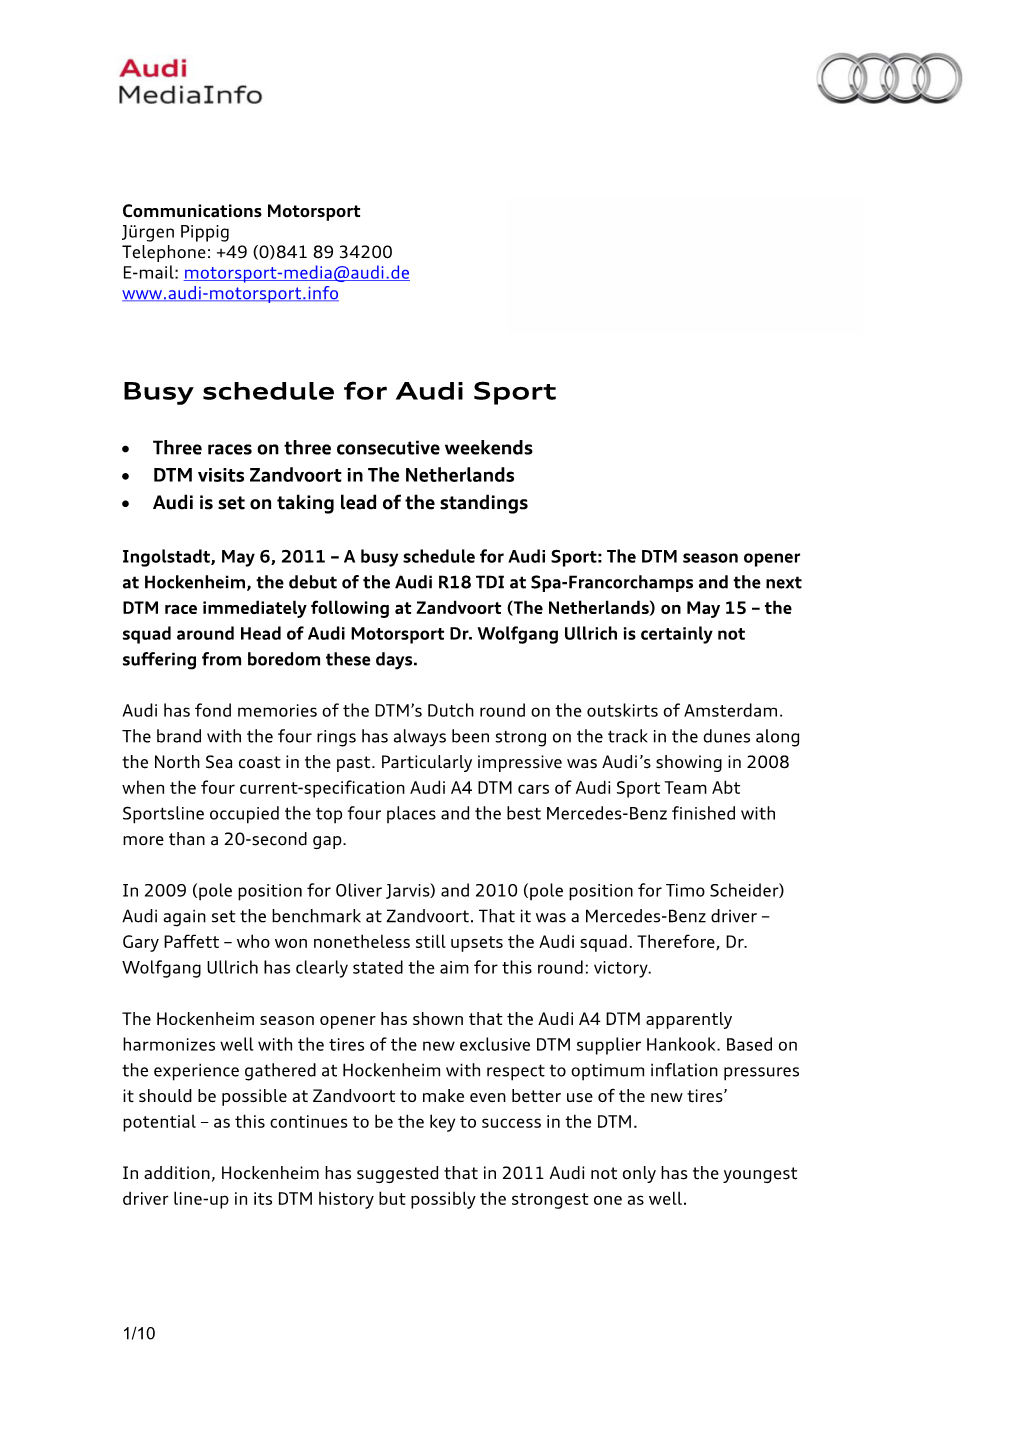 Busy Schedule for Audi Sport